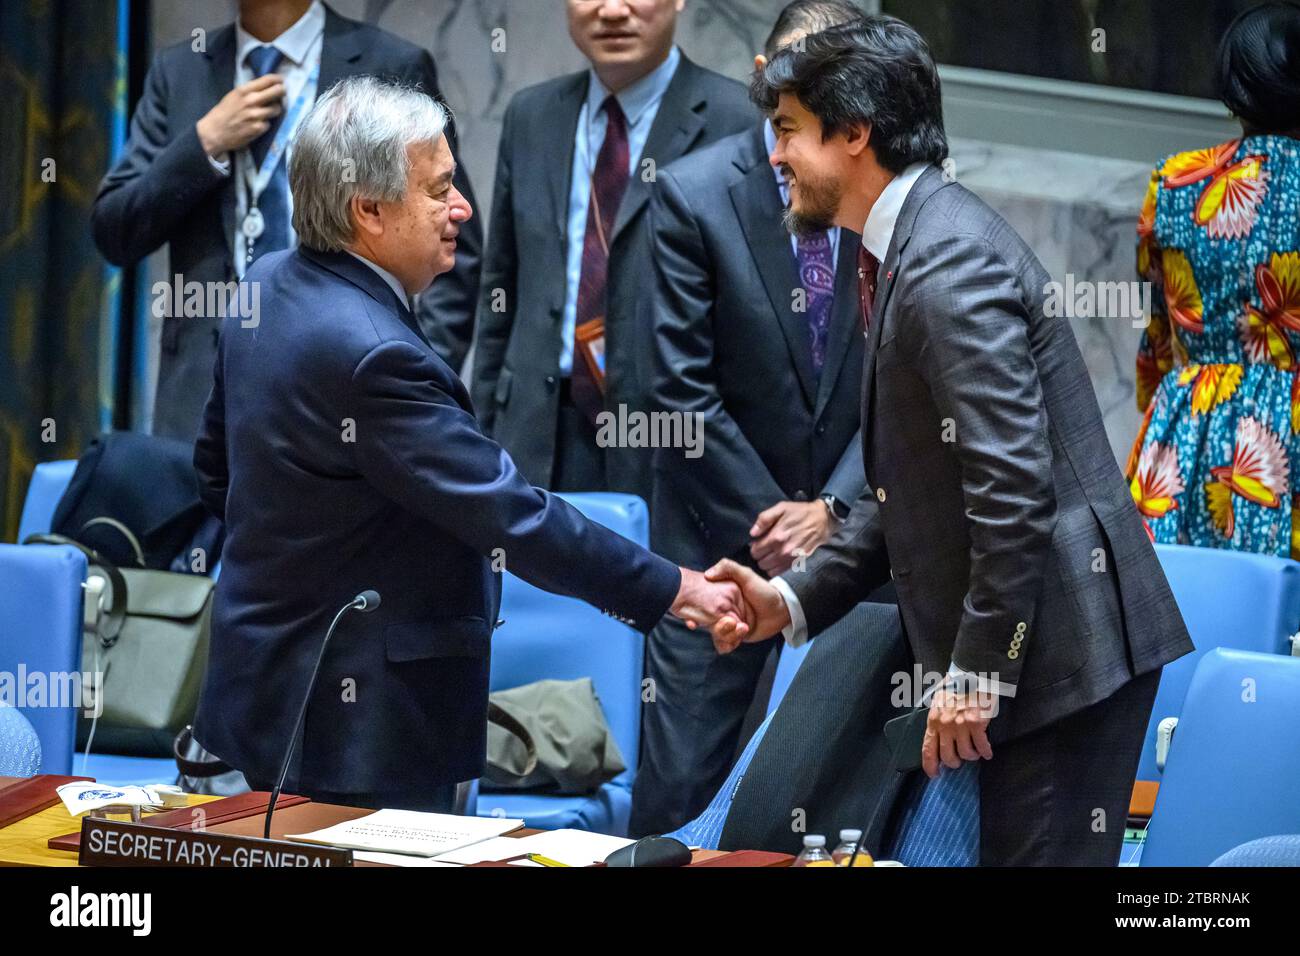 New York, USA, 8th Dec. 2023. Ambassador José de la Gasca of Ecuador, president of the Security Council in December (R) greets United Nations Secretary-General Antonio Guterres before the start of a meeting of the UN Security Council on the situation in the Middle East, including the Palestinian question. Credit: Enrique Shore/Alamy Live News Stock Photo